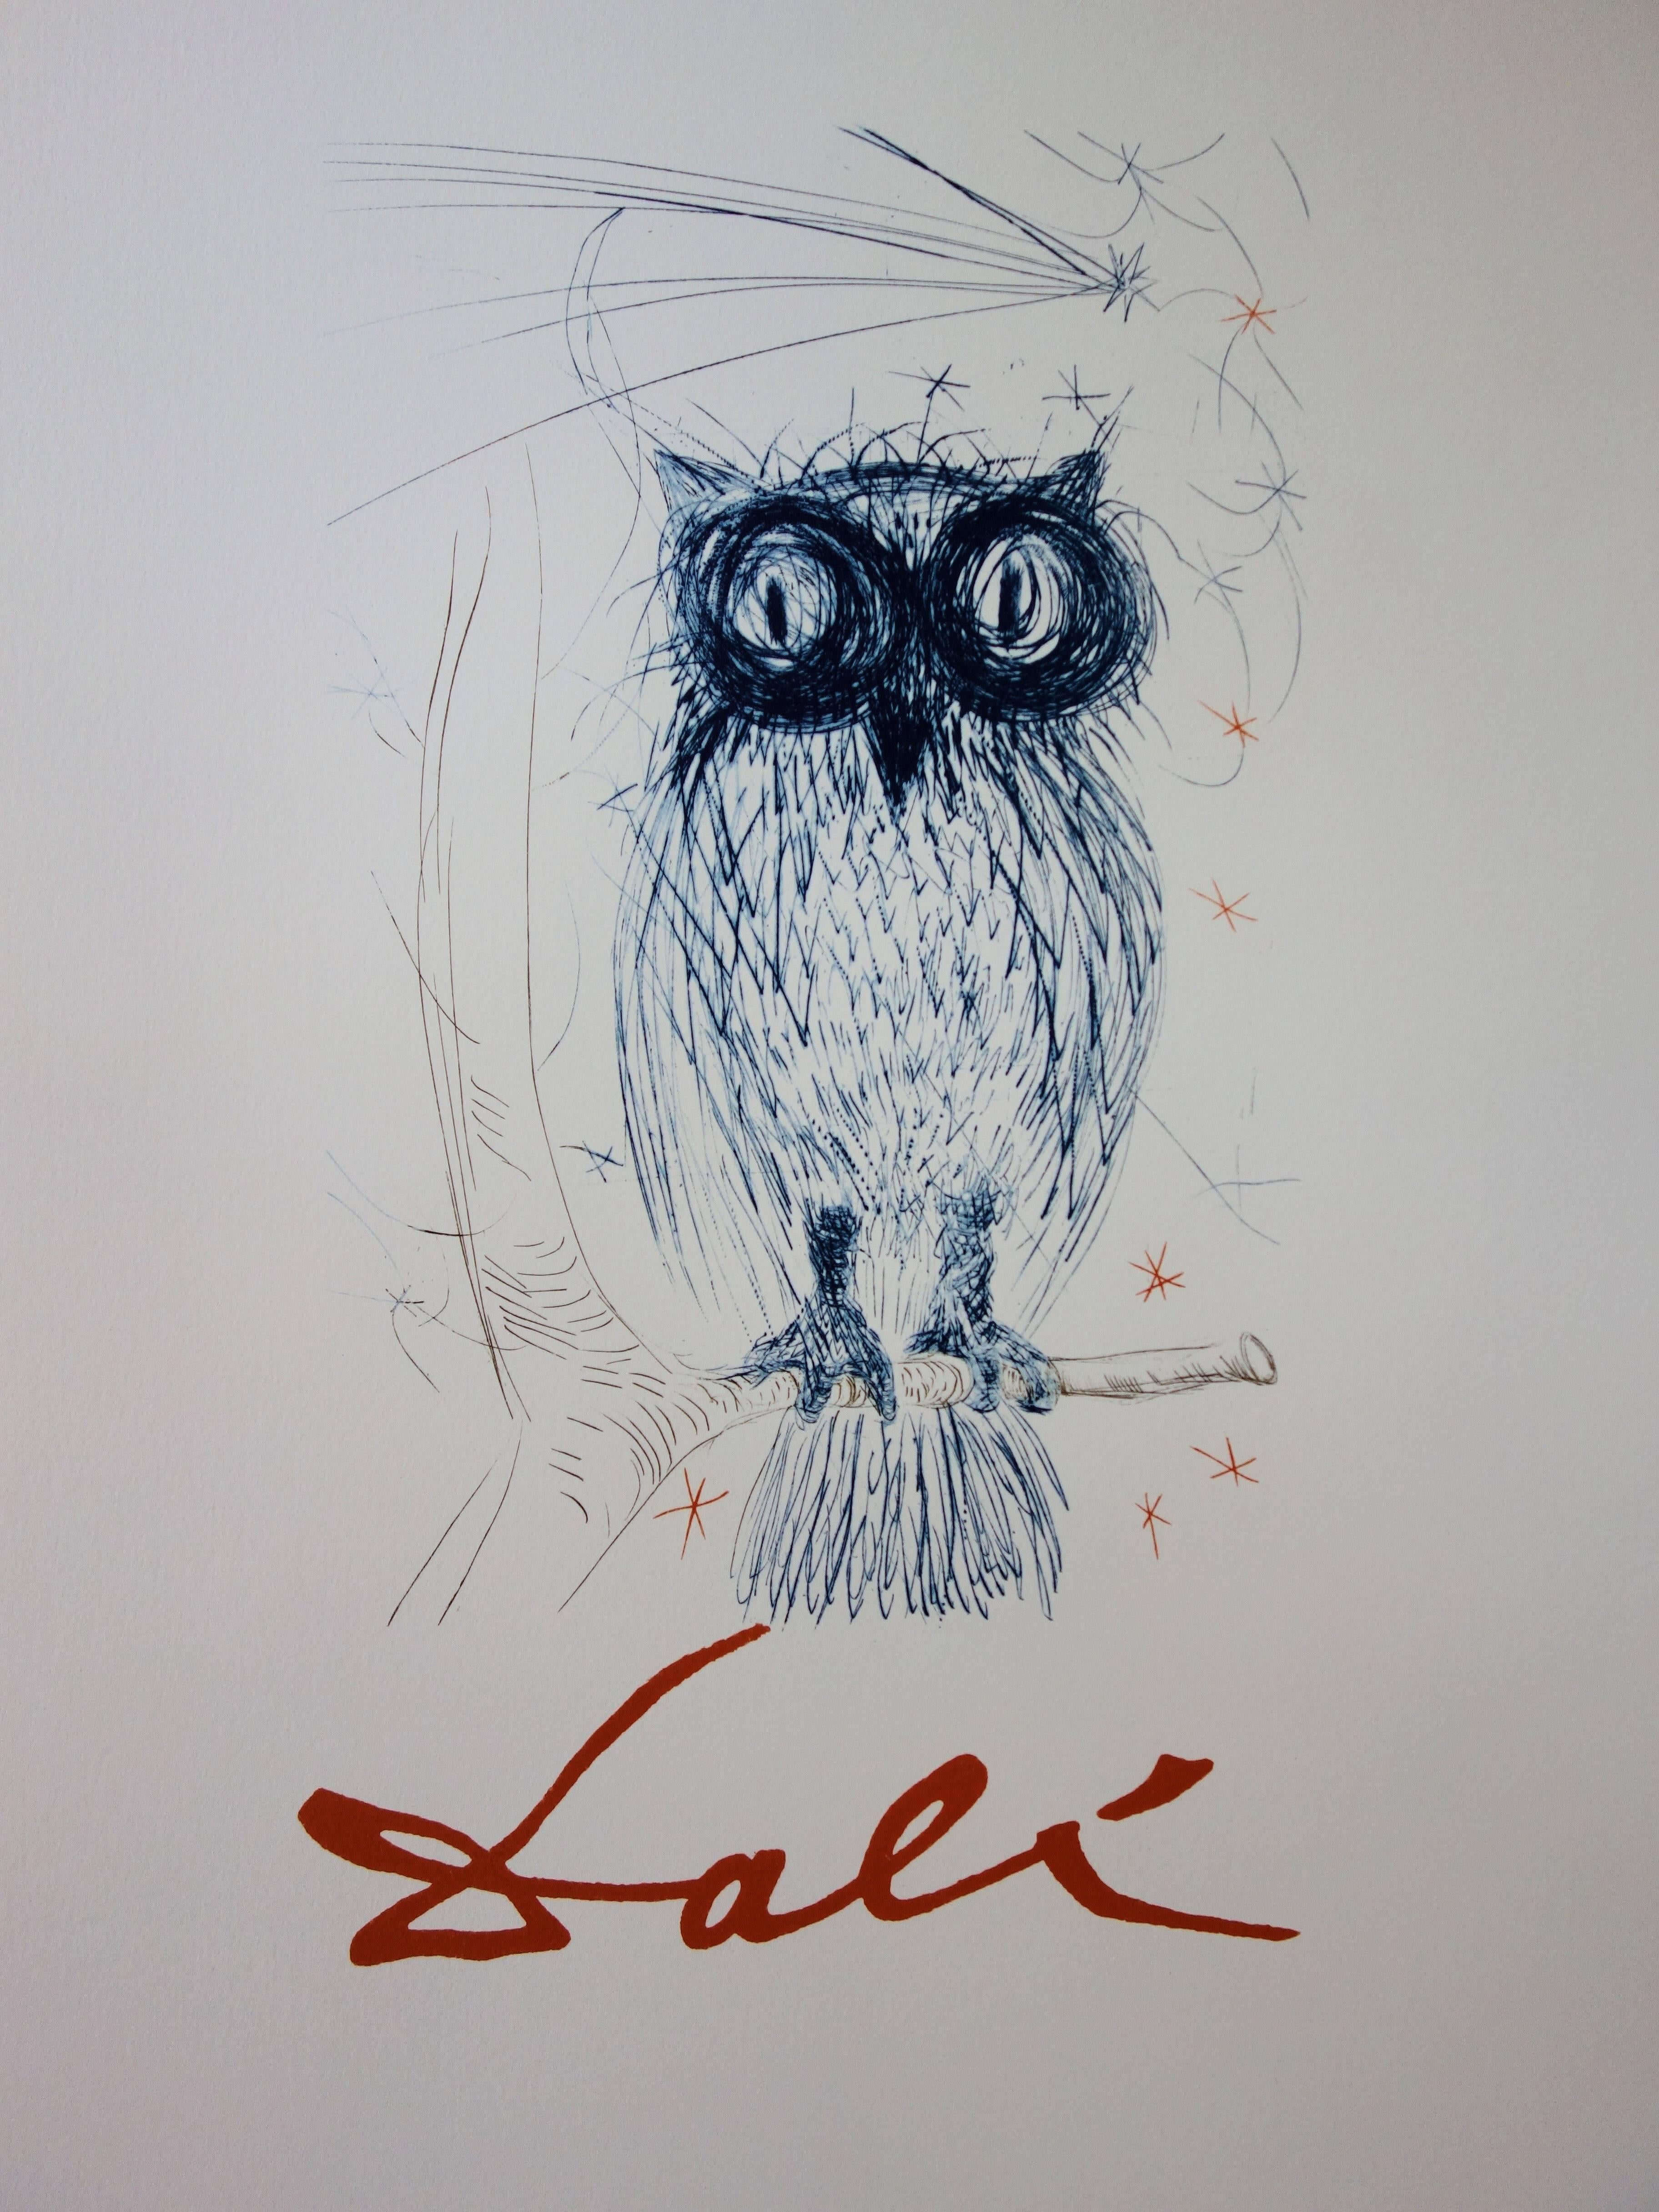 Salvador DALI (after)
The Blue Owl

Lithograph
Printed signature in the plate 
Printed in Matthieu workshop
Edited by J. Schneider for the Dali exhibition at Galerie Orangerie in 1983/84, here a rare copy on vellum without the text for the